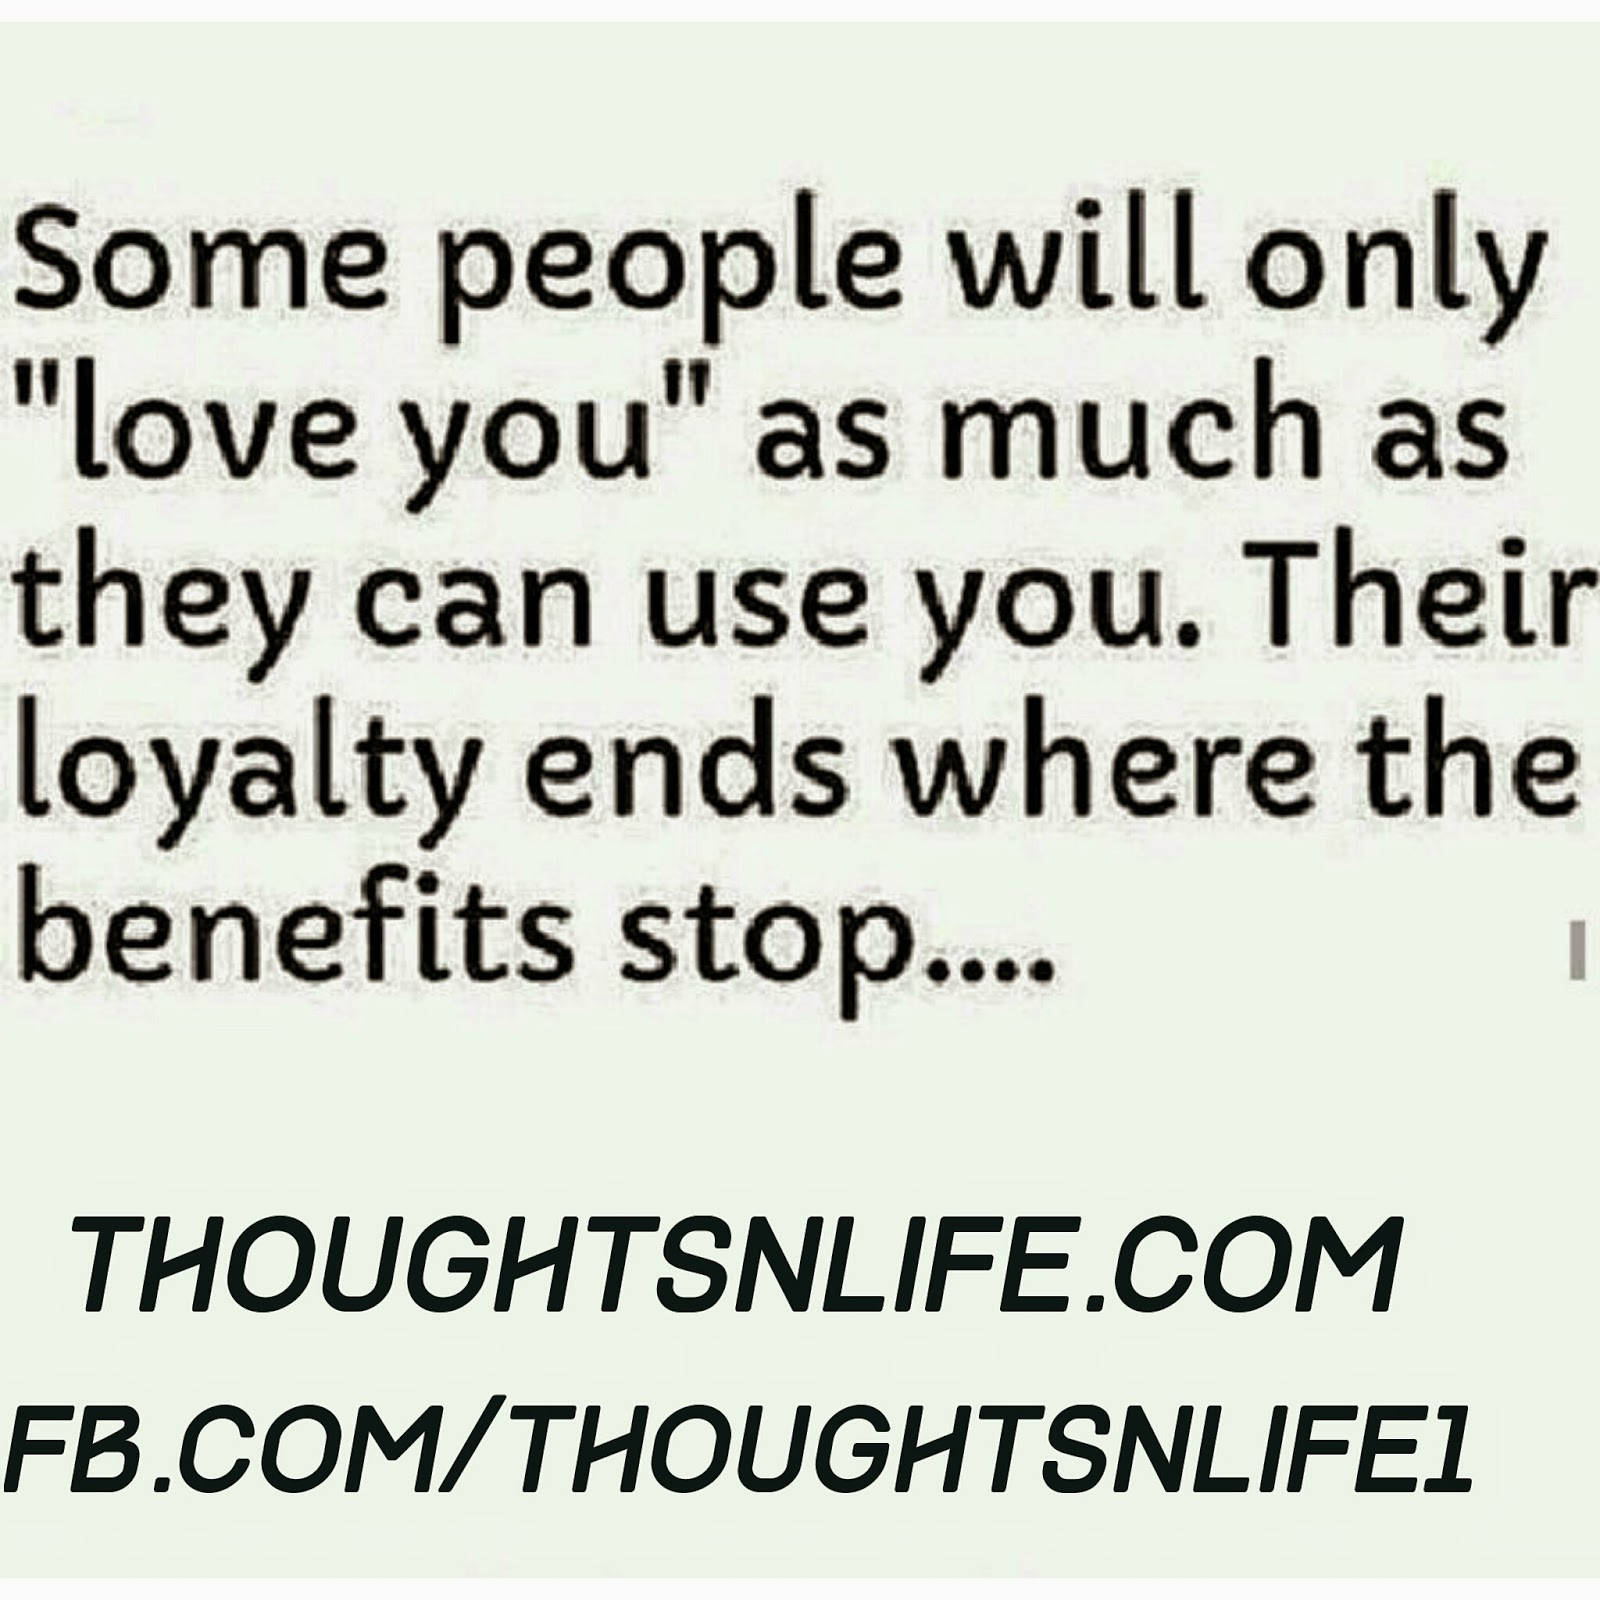 Selfish Relationship Quotes
 Their loyalty ends where the benefits stops